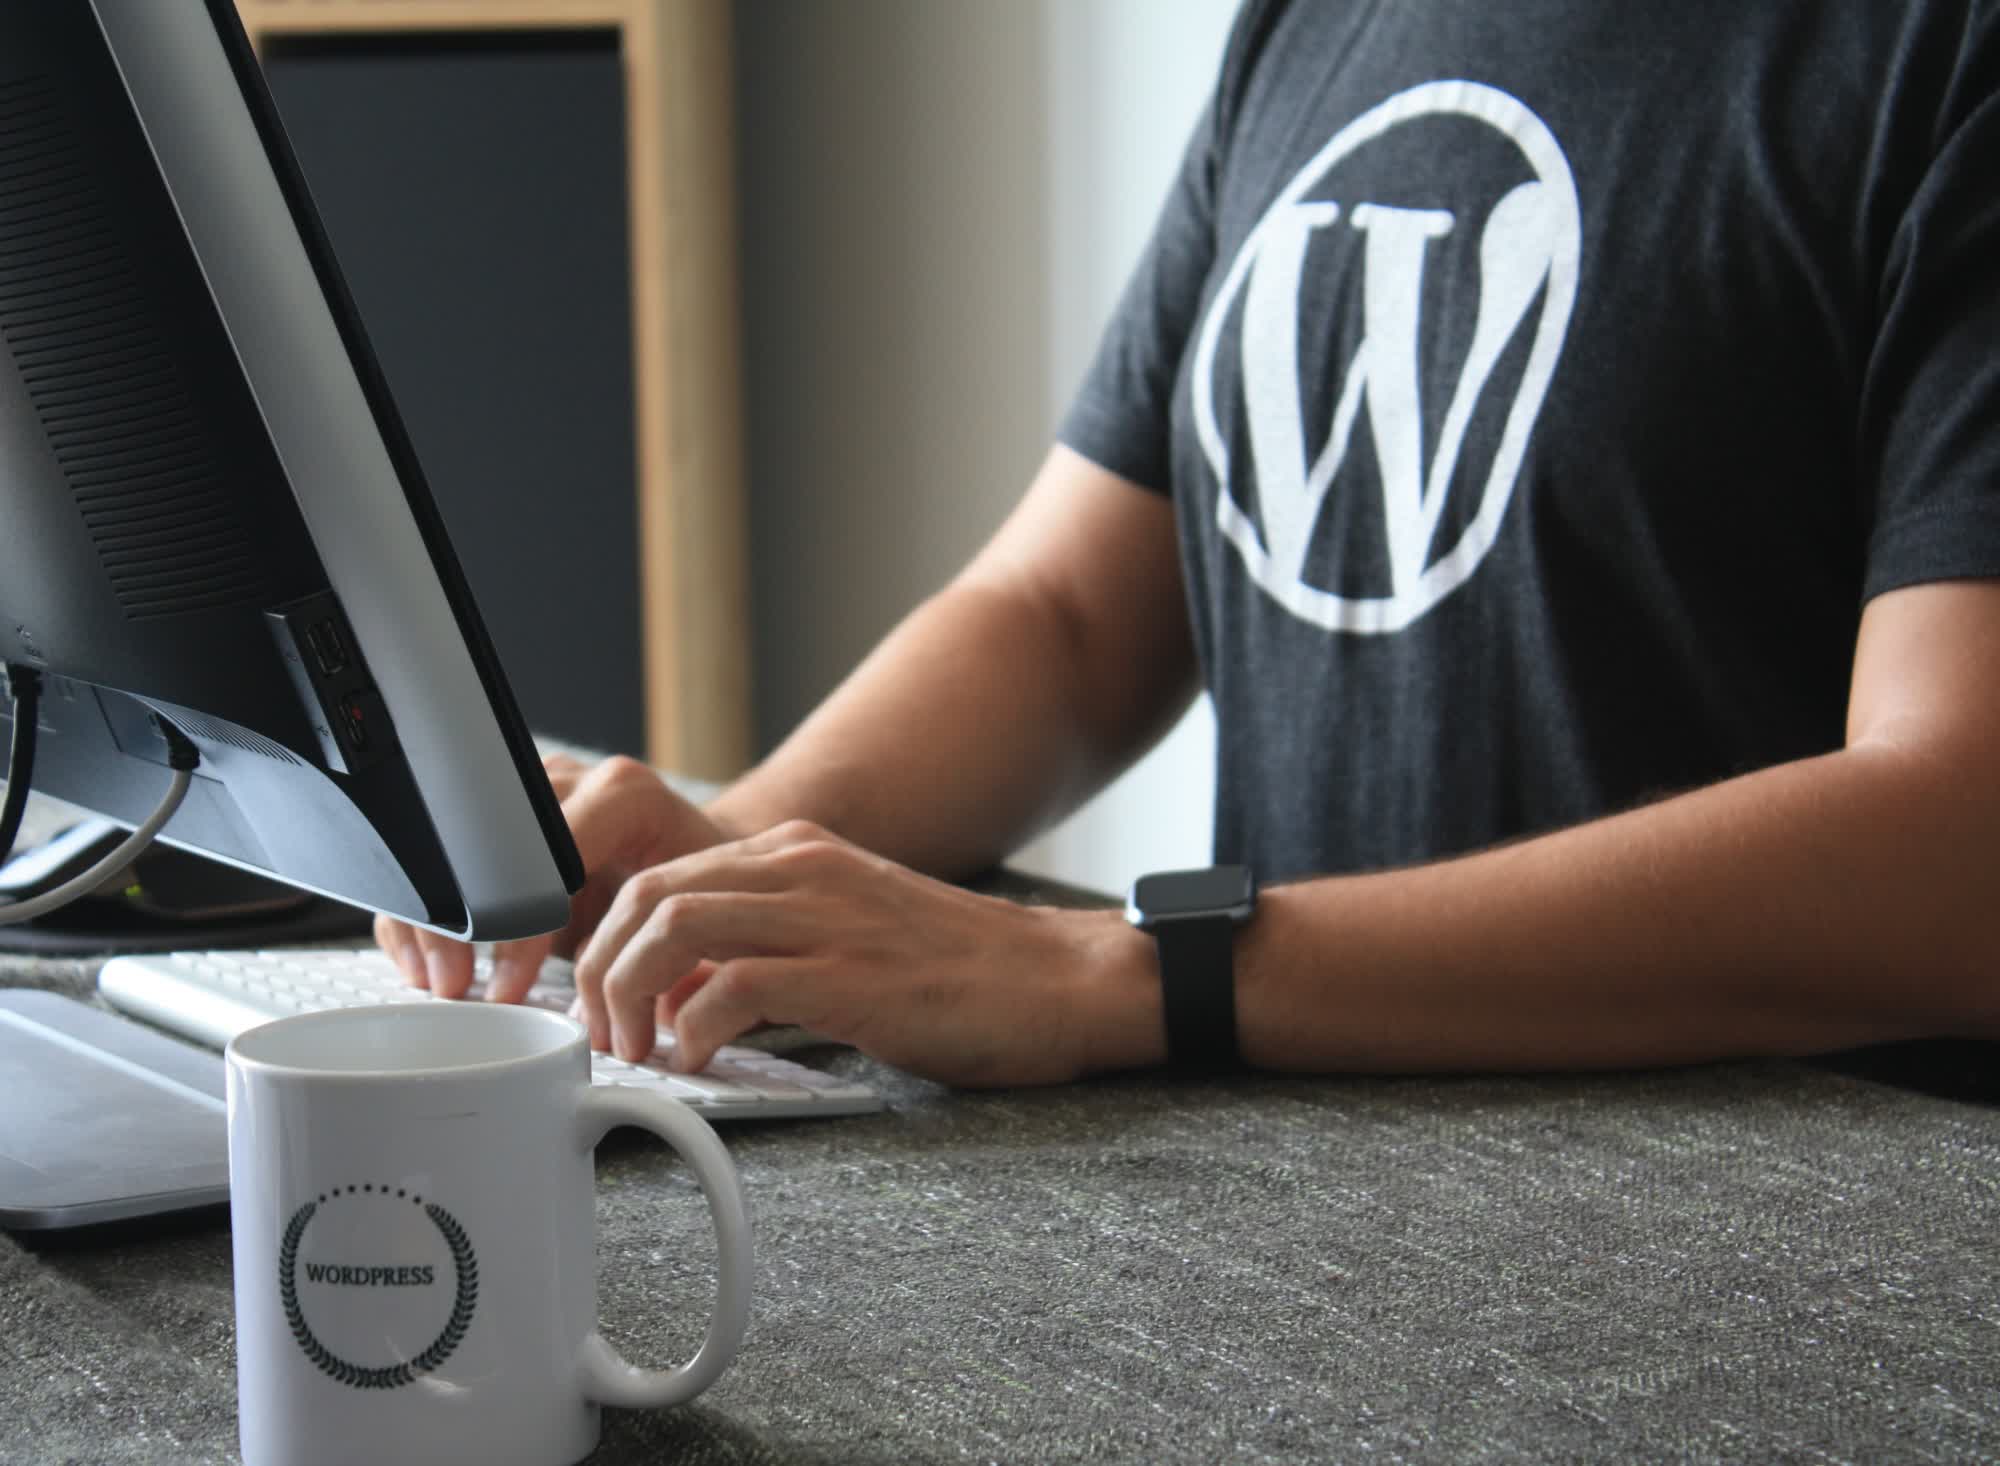 WordPress now offers a 100-year domain and hosting plan for $38K